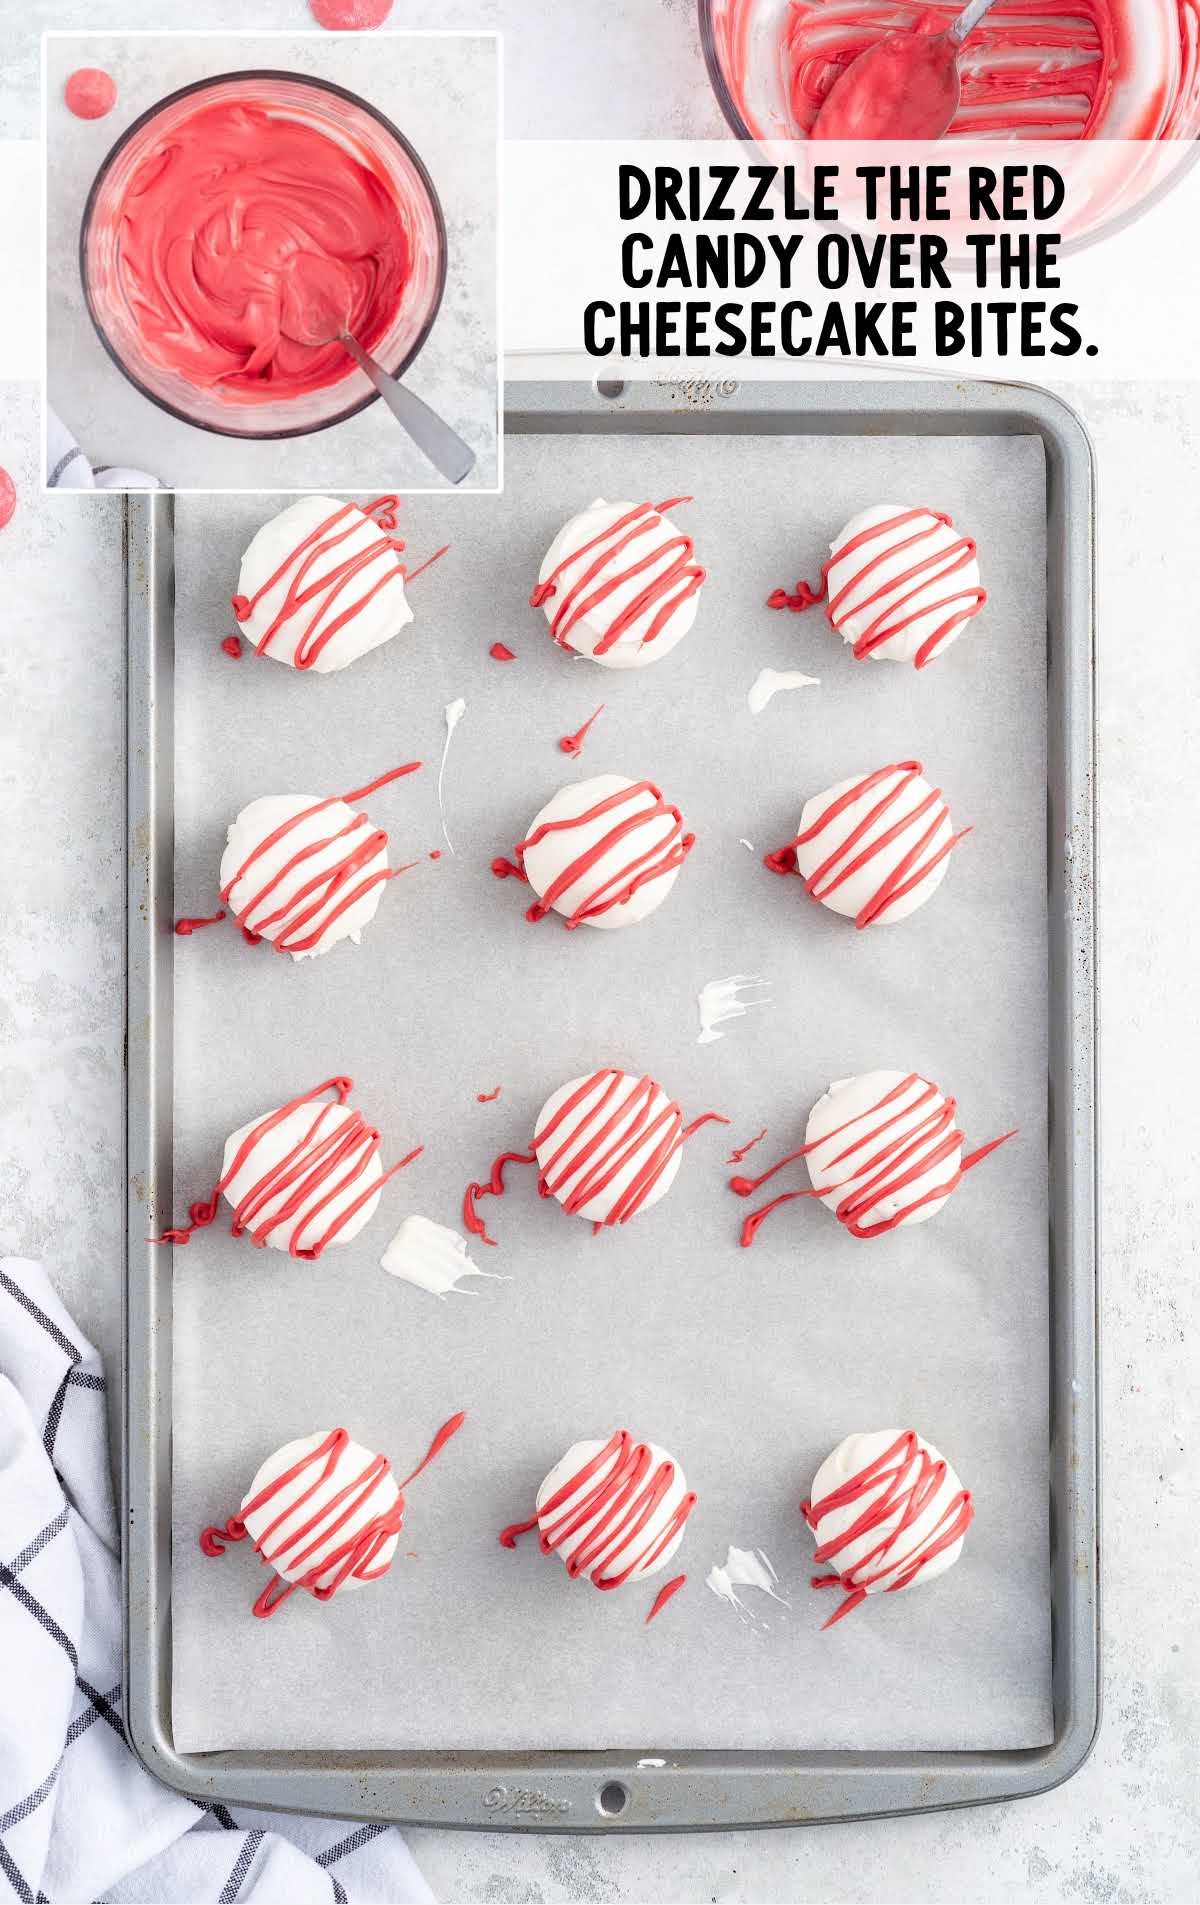 red candy drizzled over the cheesecake bites